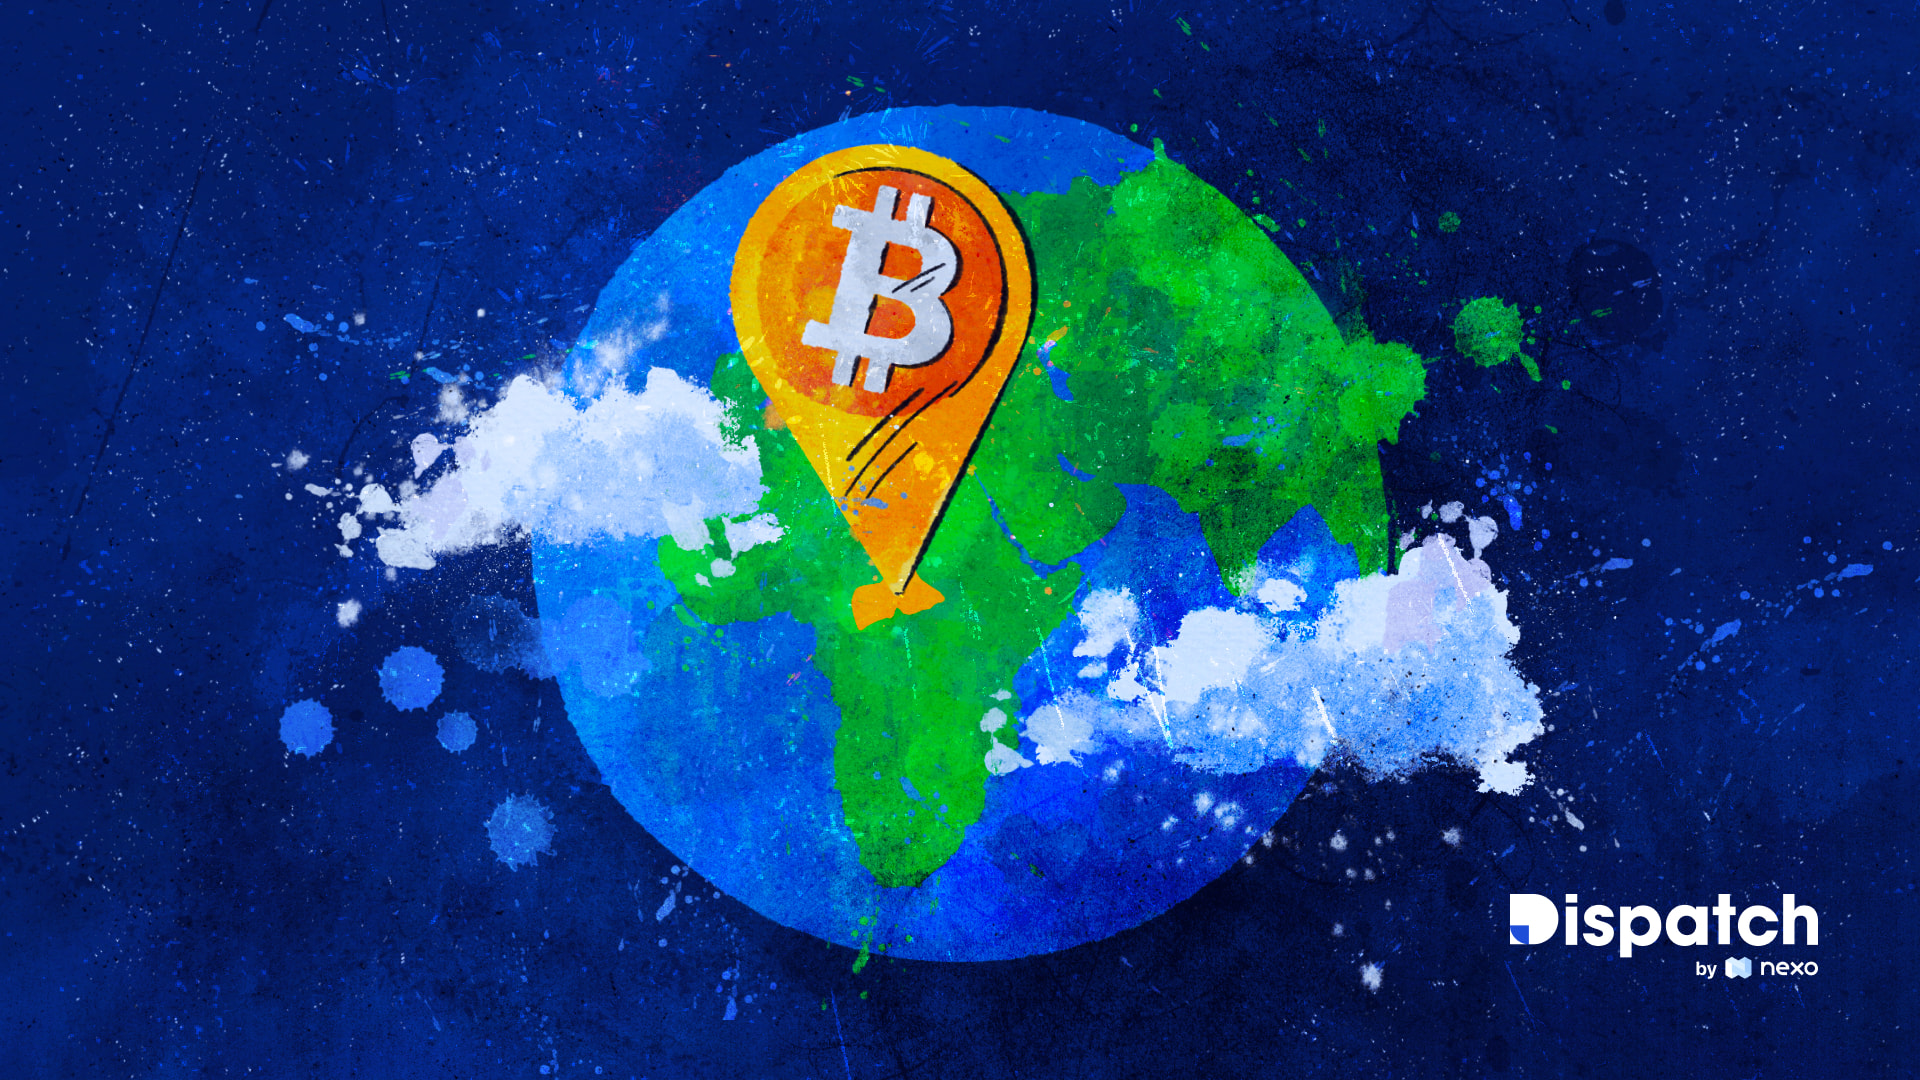 Dispatch #85: Central African Republic Adopts Bitcoin